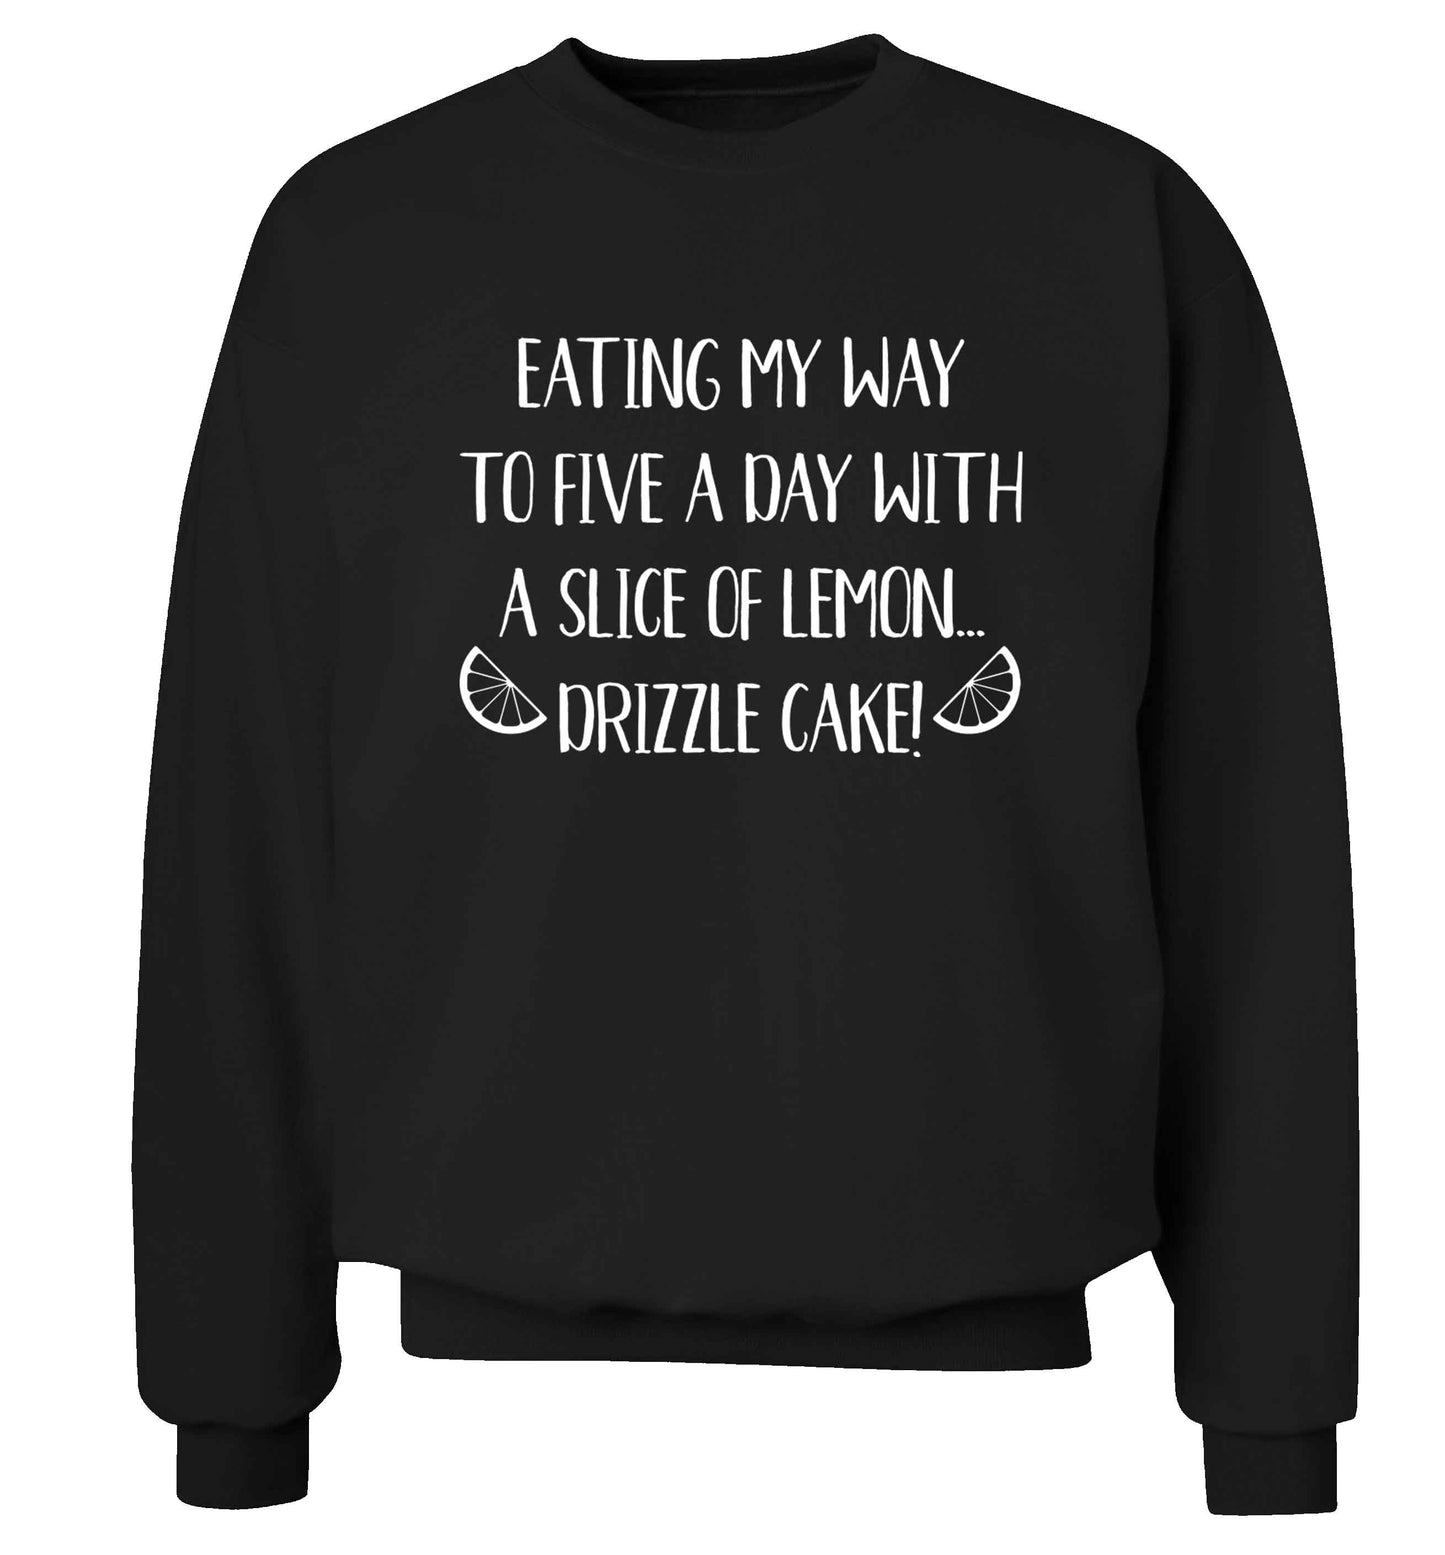 Eating my way to five a day with a slice of lemon drizzle cake day Adult's unisex black Sweater 2XL